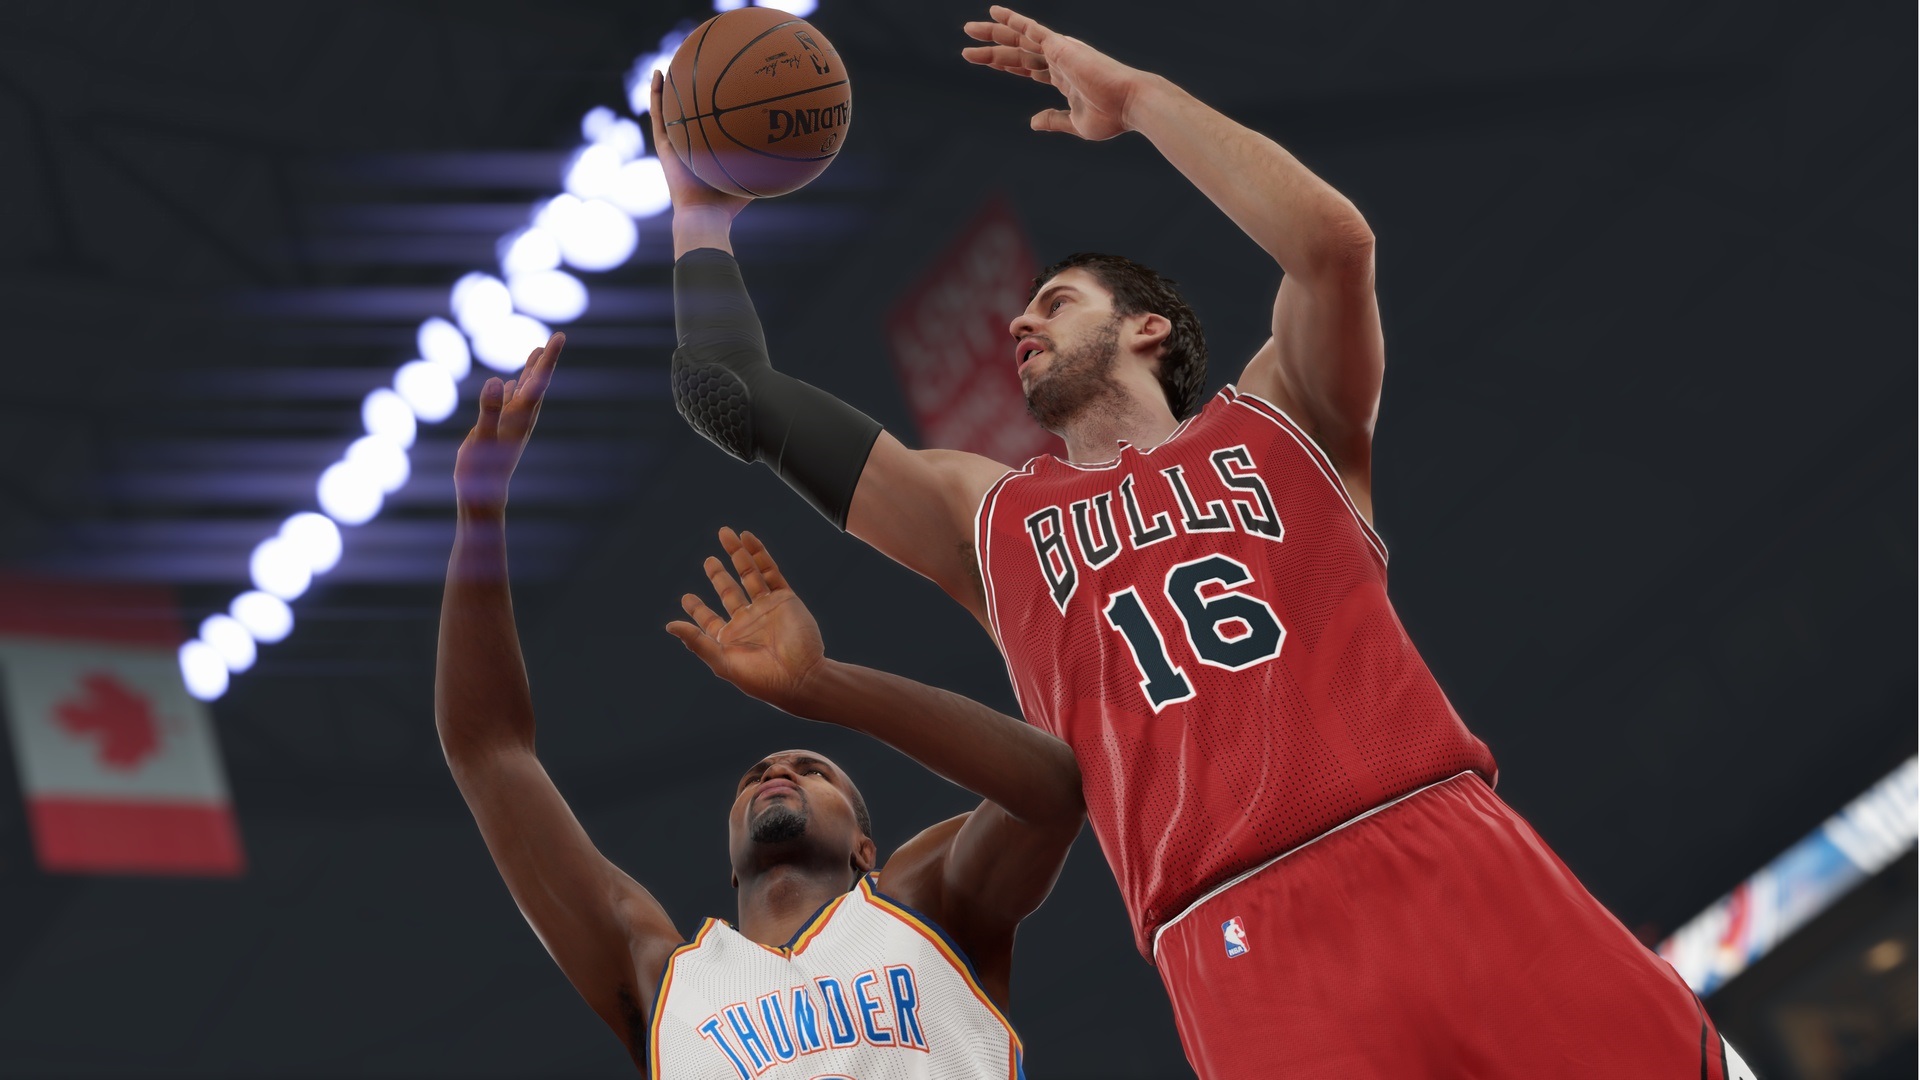 New Nba 2k15 1080p Ps4 Screenshots Released Shows Highly Detailed